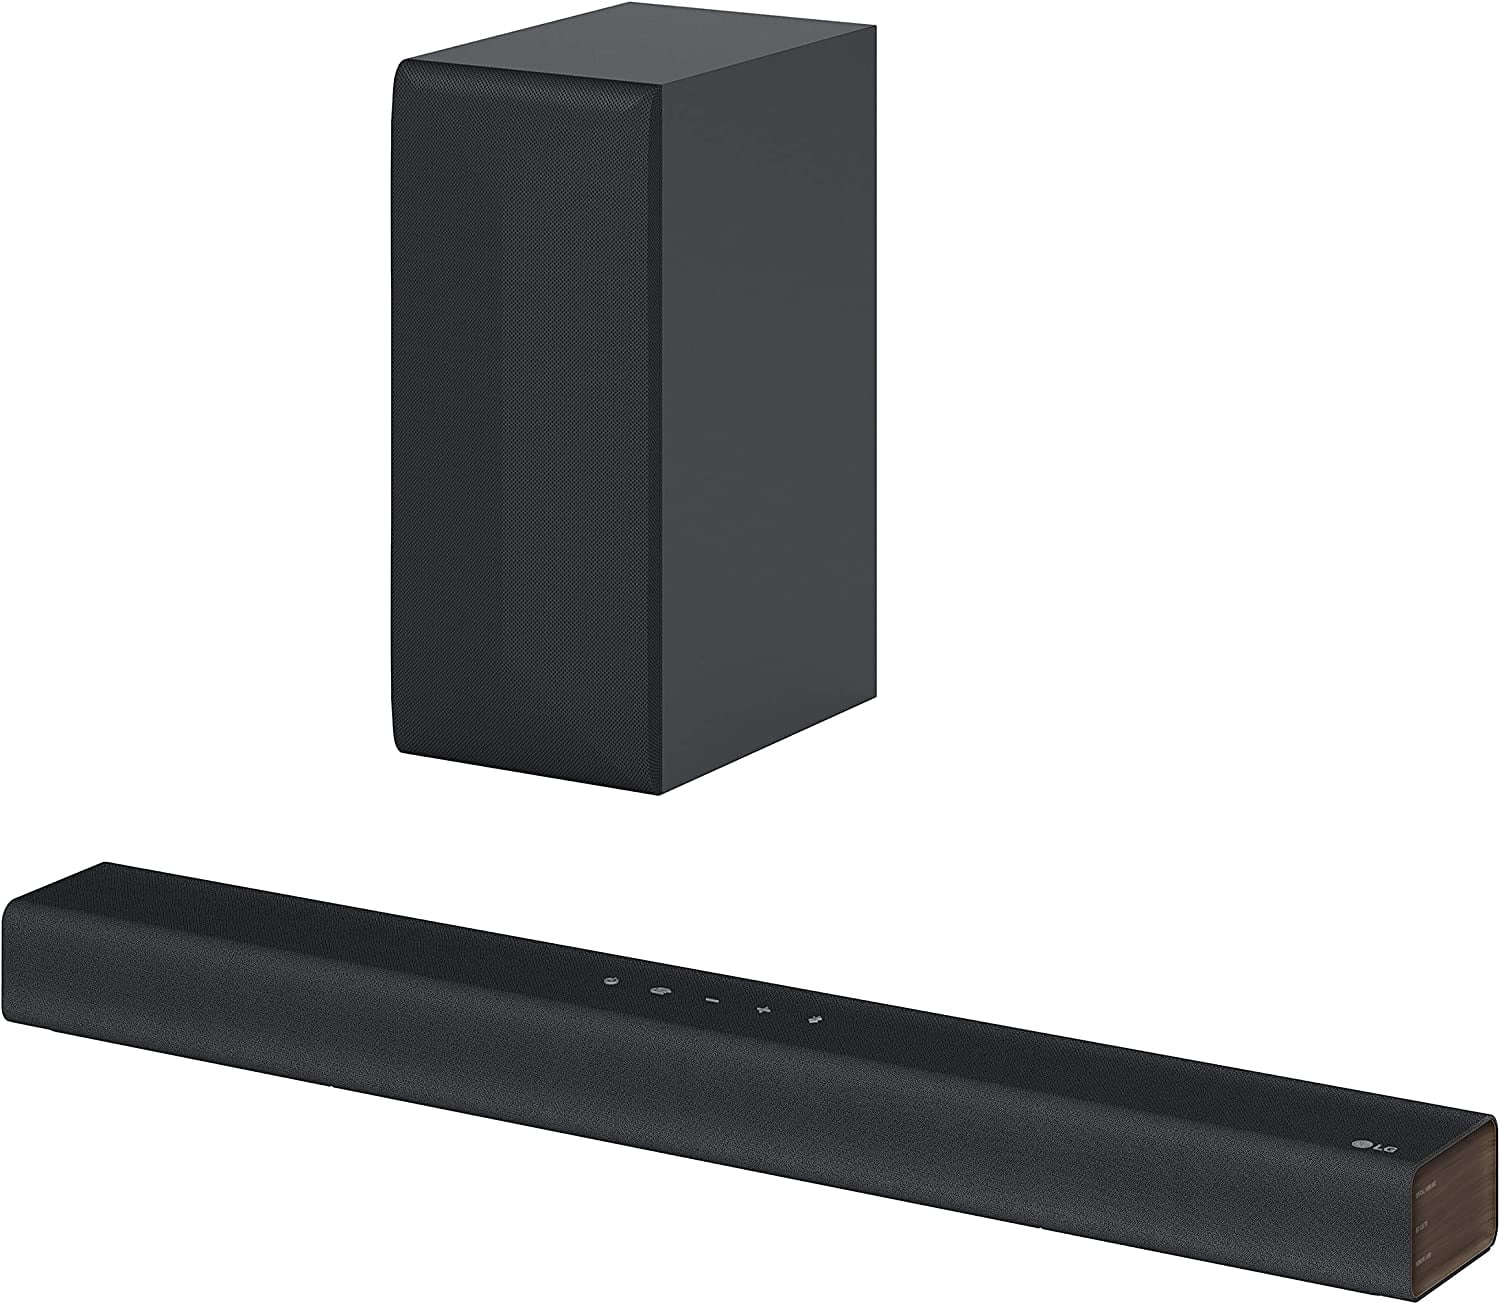 Wireless 2.1 Bluetooth Sound Bar S40Q LG Subwoofer Channel and with 300W